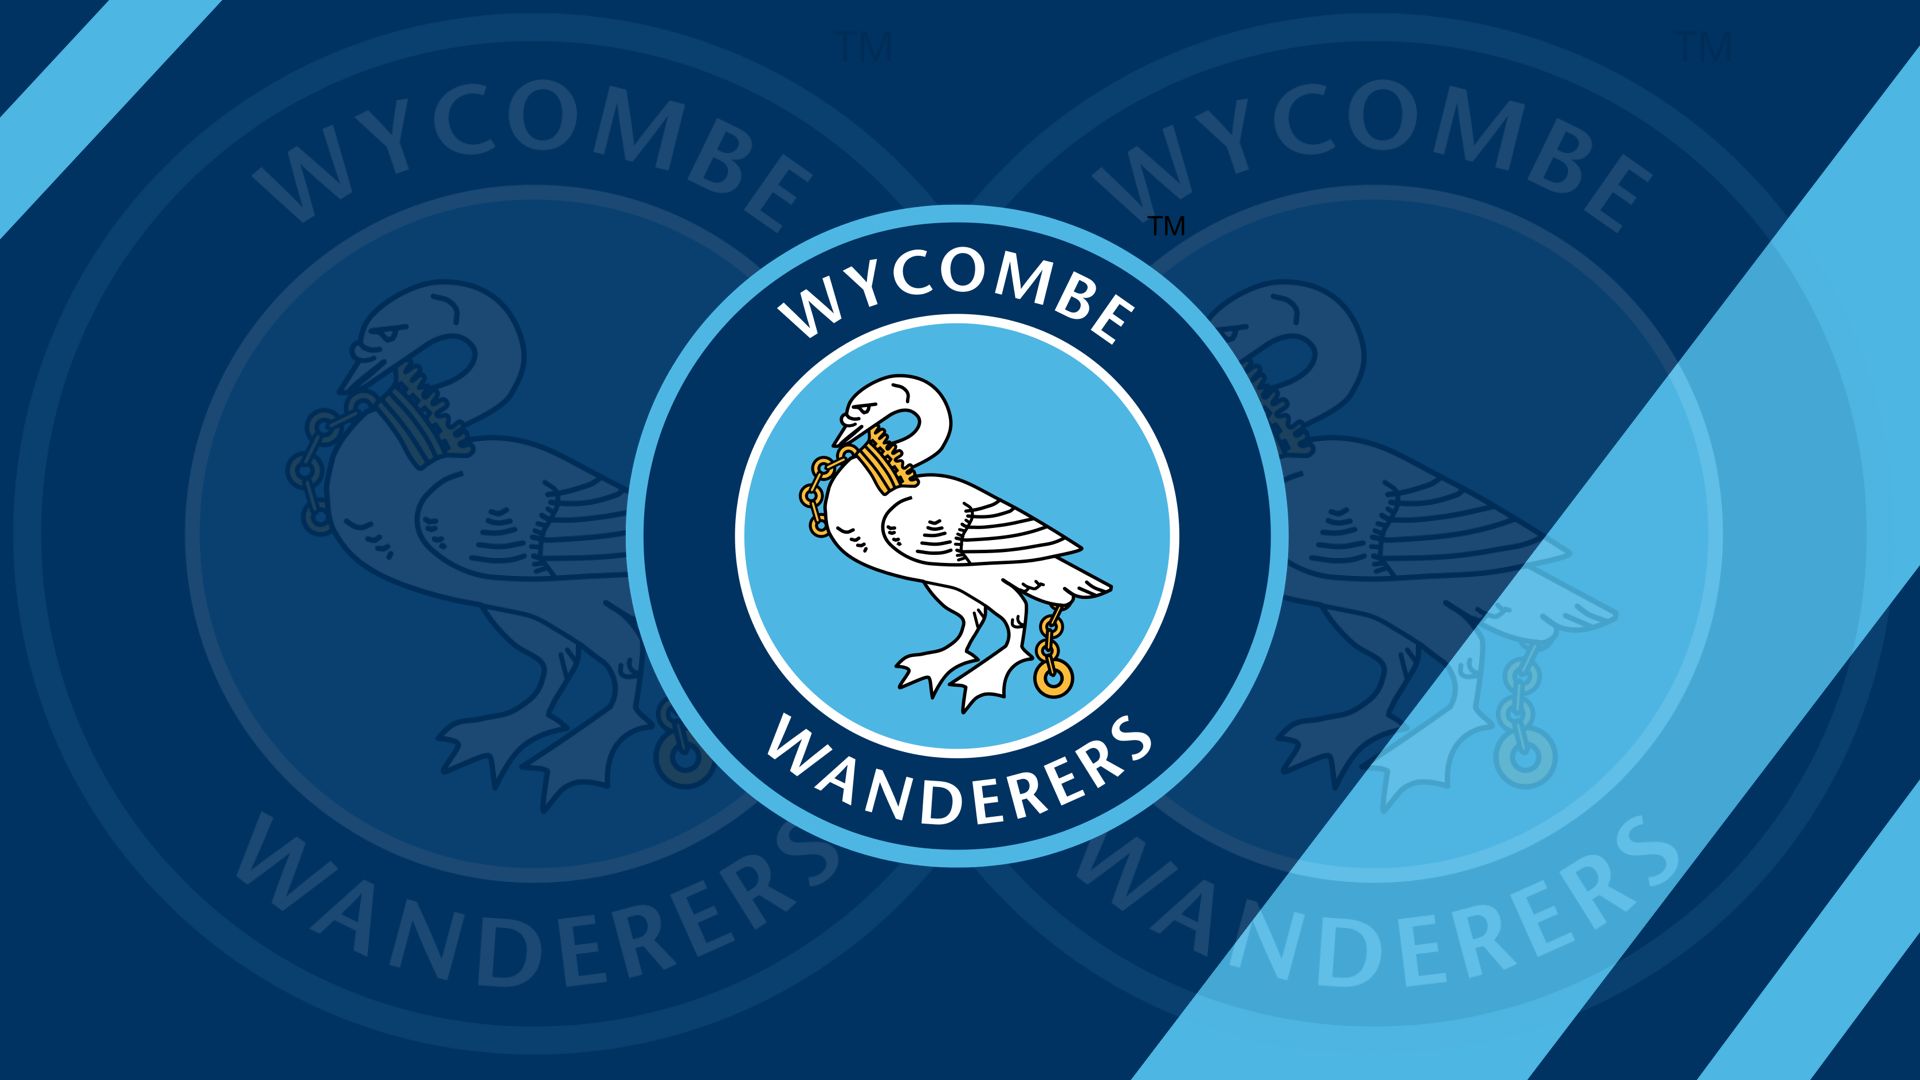 Best Wycombe Wanderers F C Background for mobile